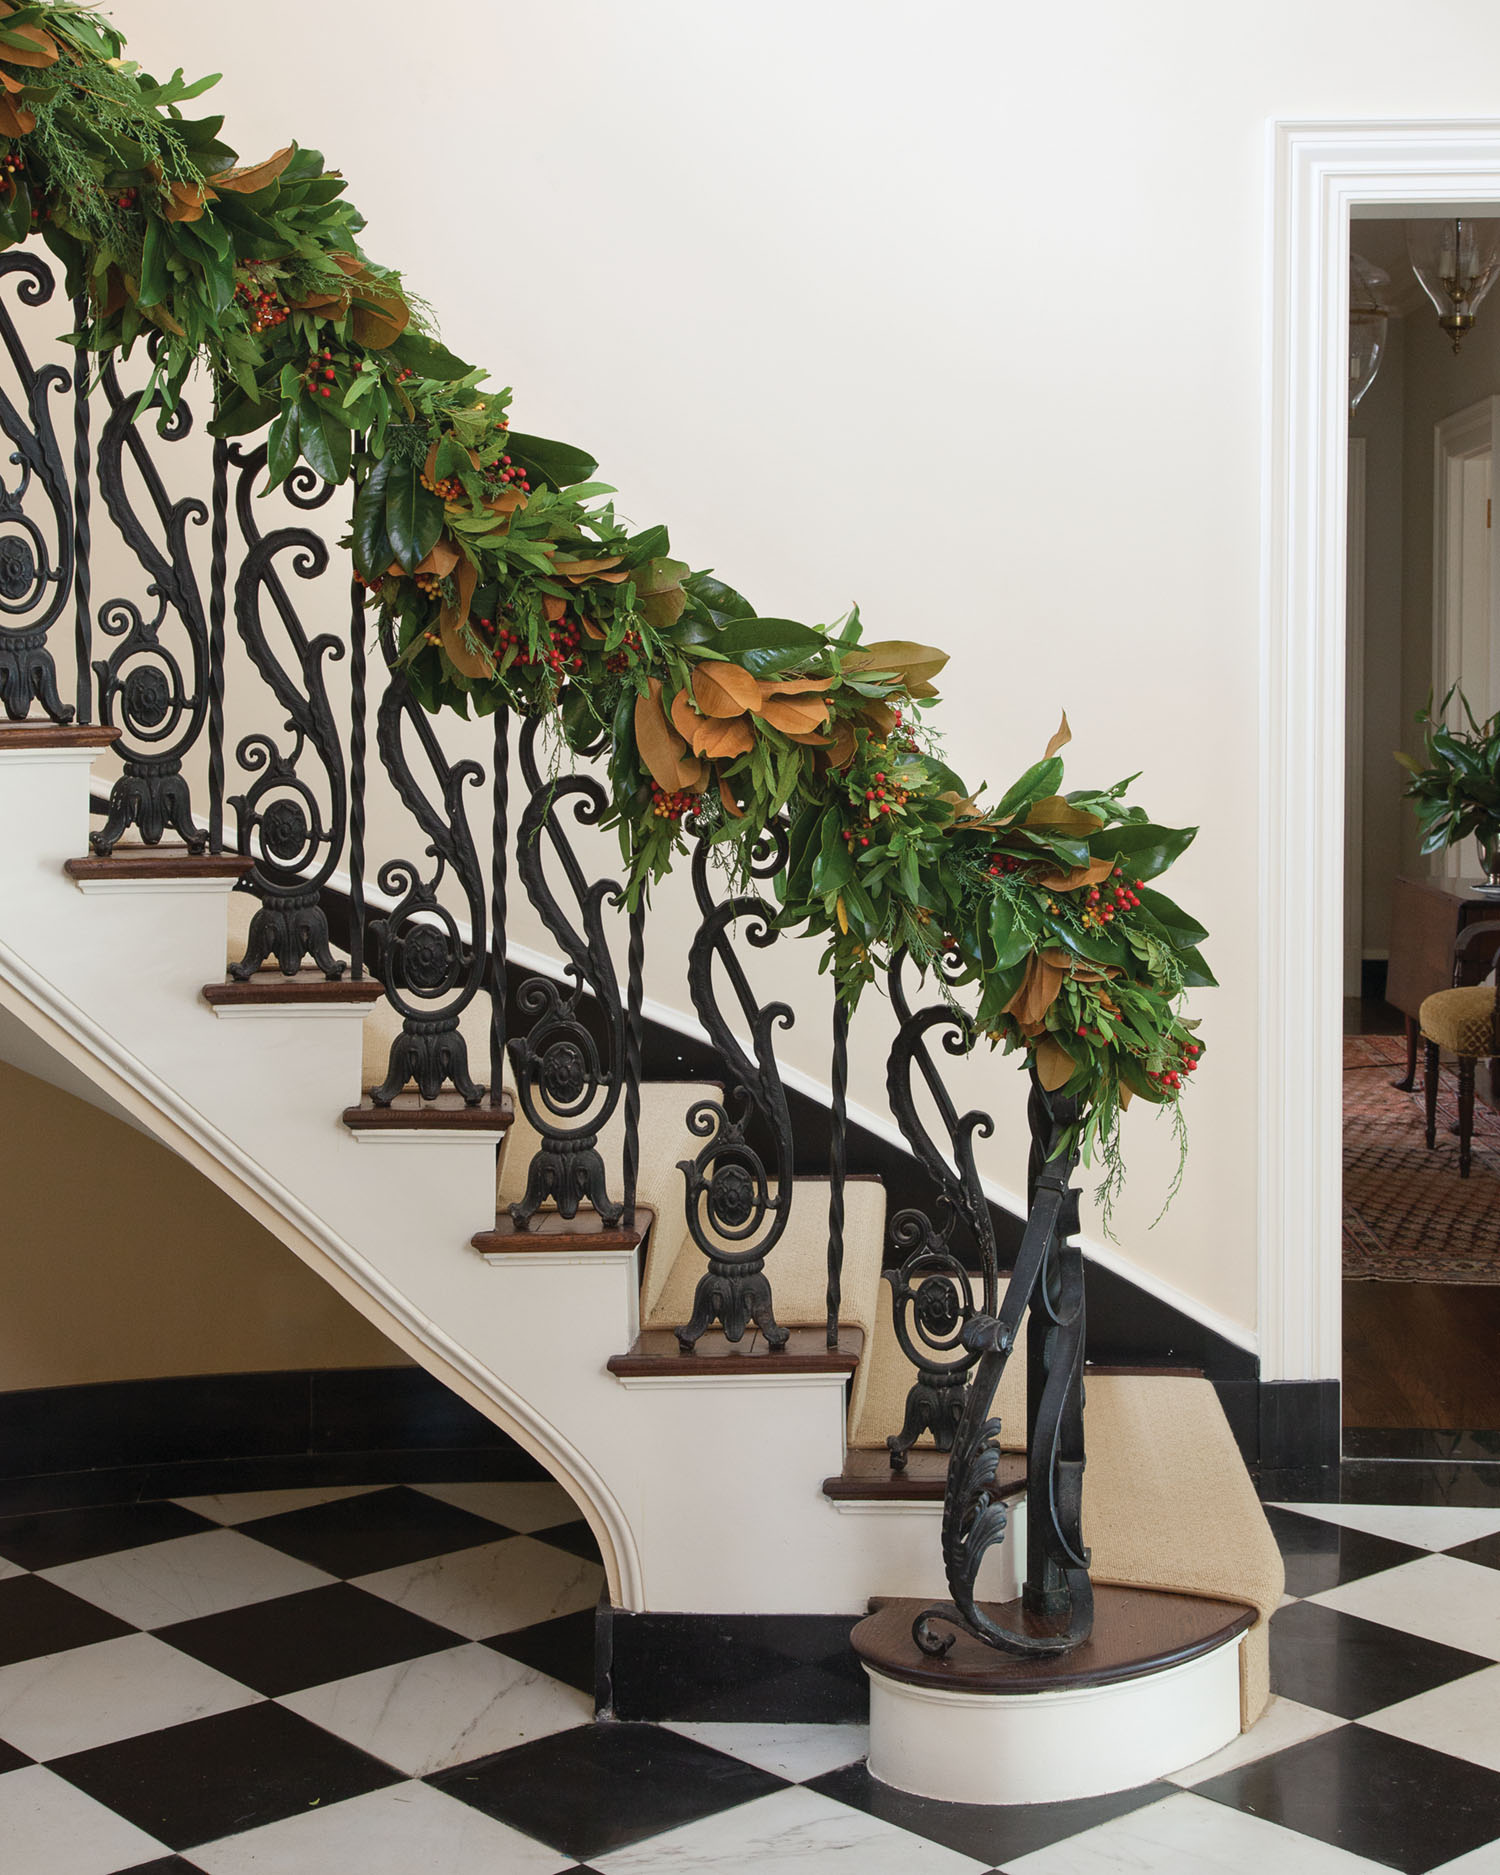 Jessica Sloane's finished evergreen garland on a wrought iron bannister